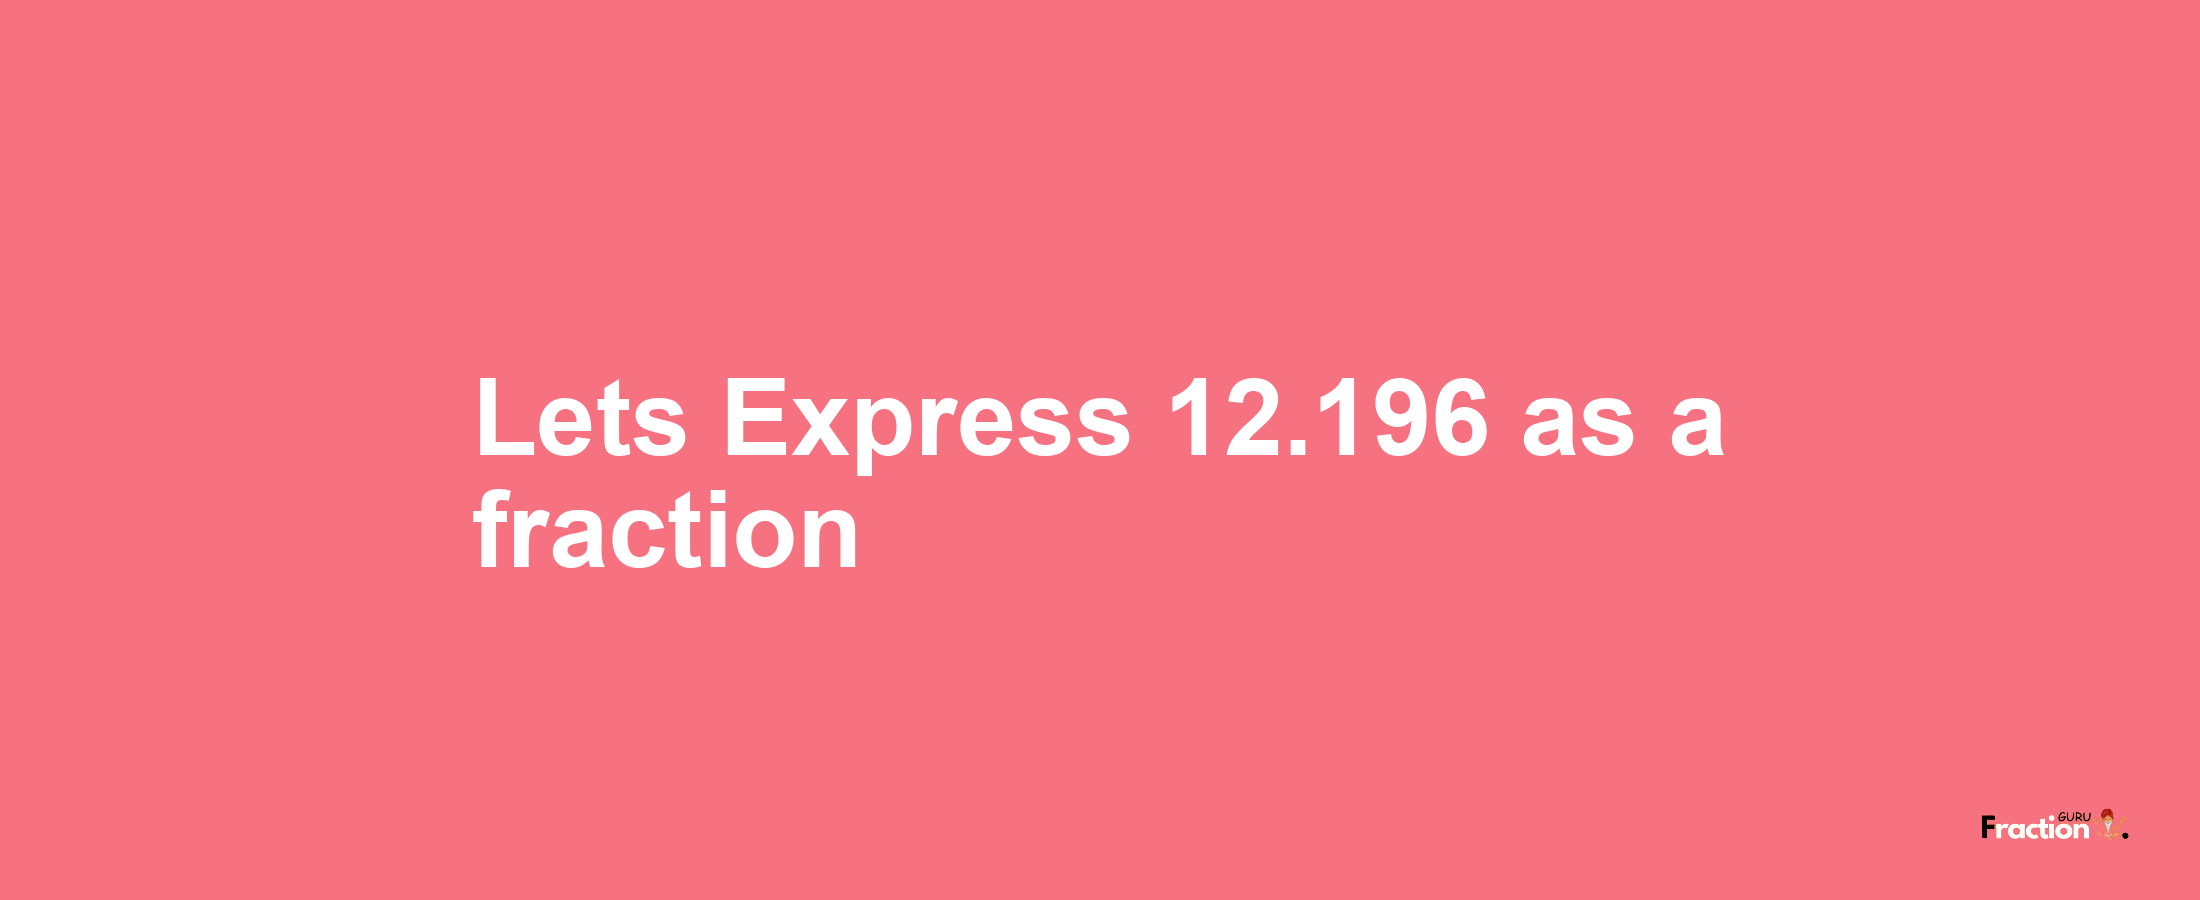 Lets Express 12.196 as afraction